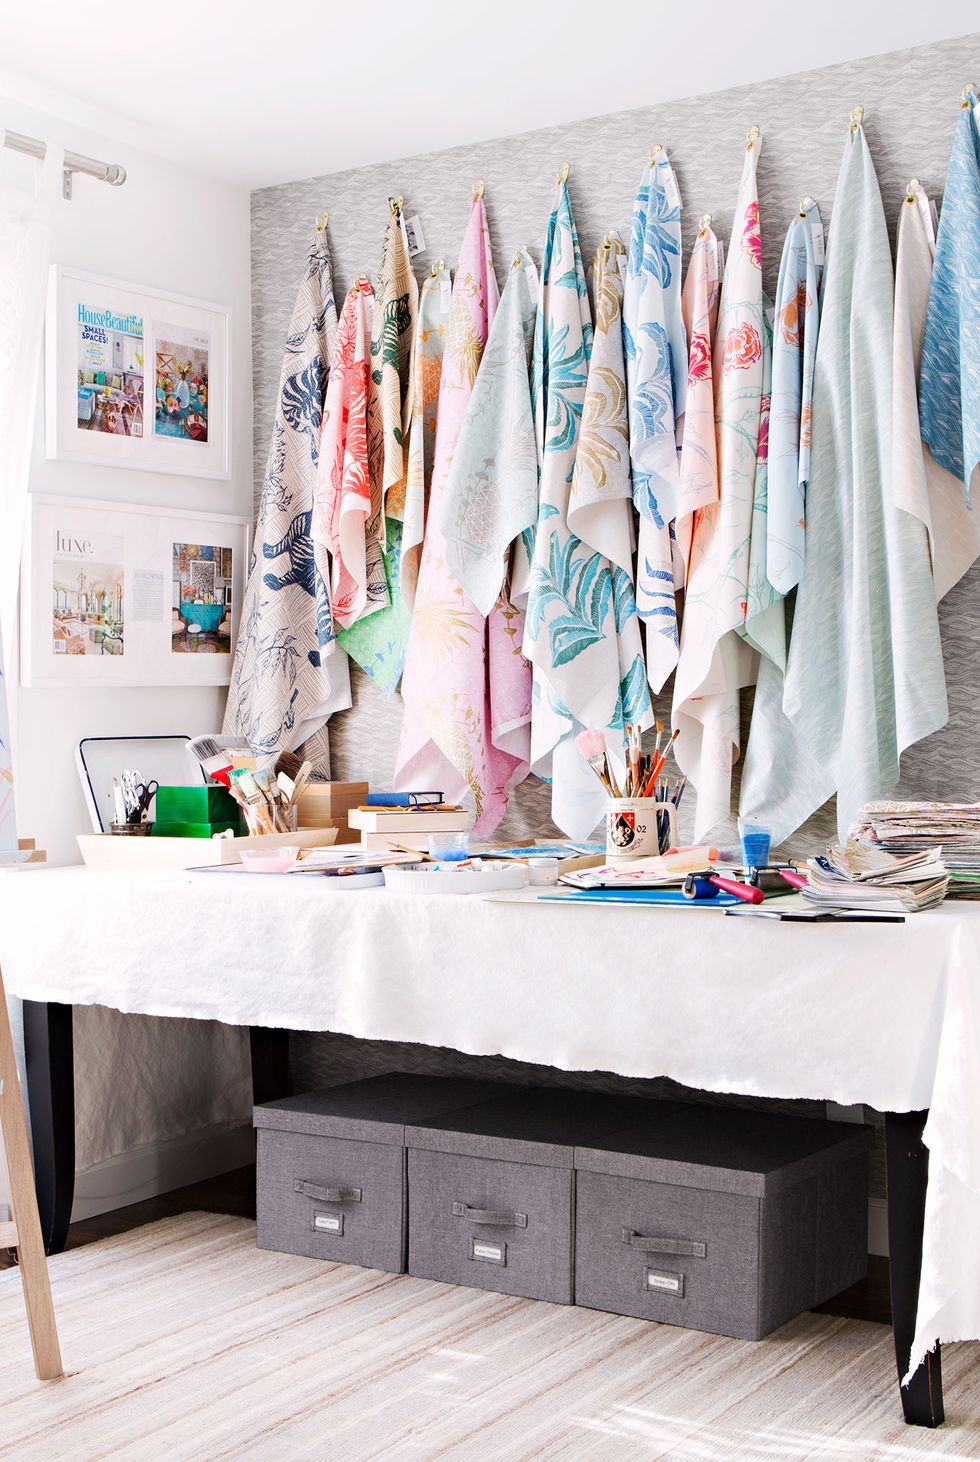 5 Home Art Studio Solutions for Small Spaces